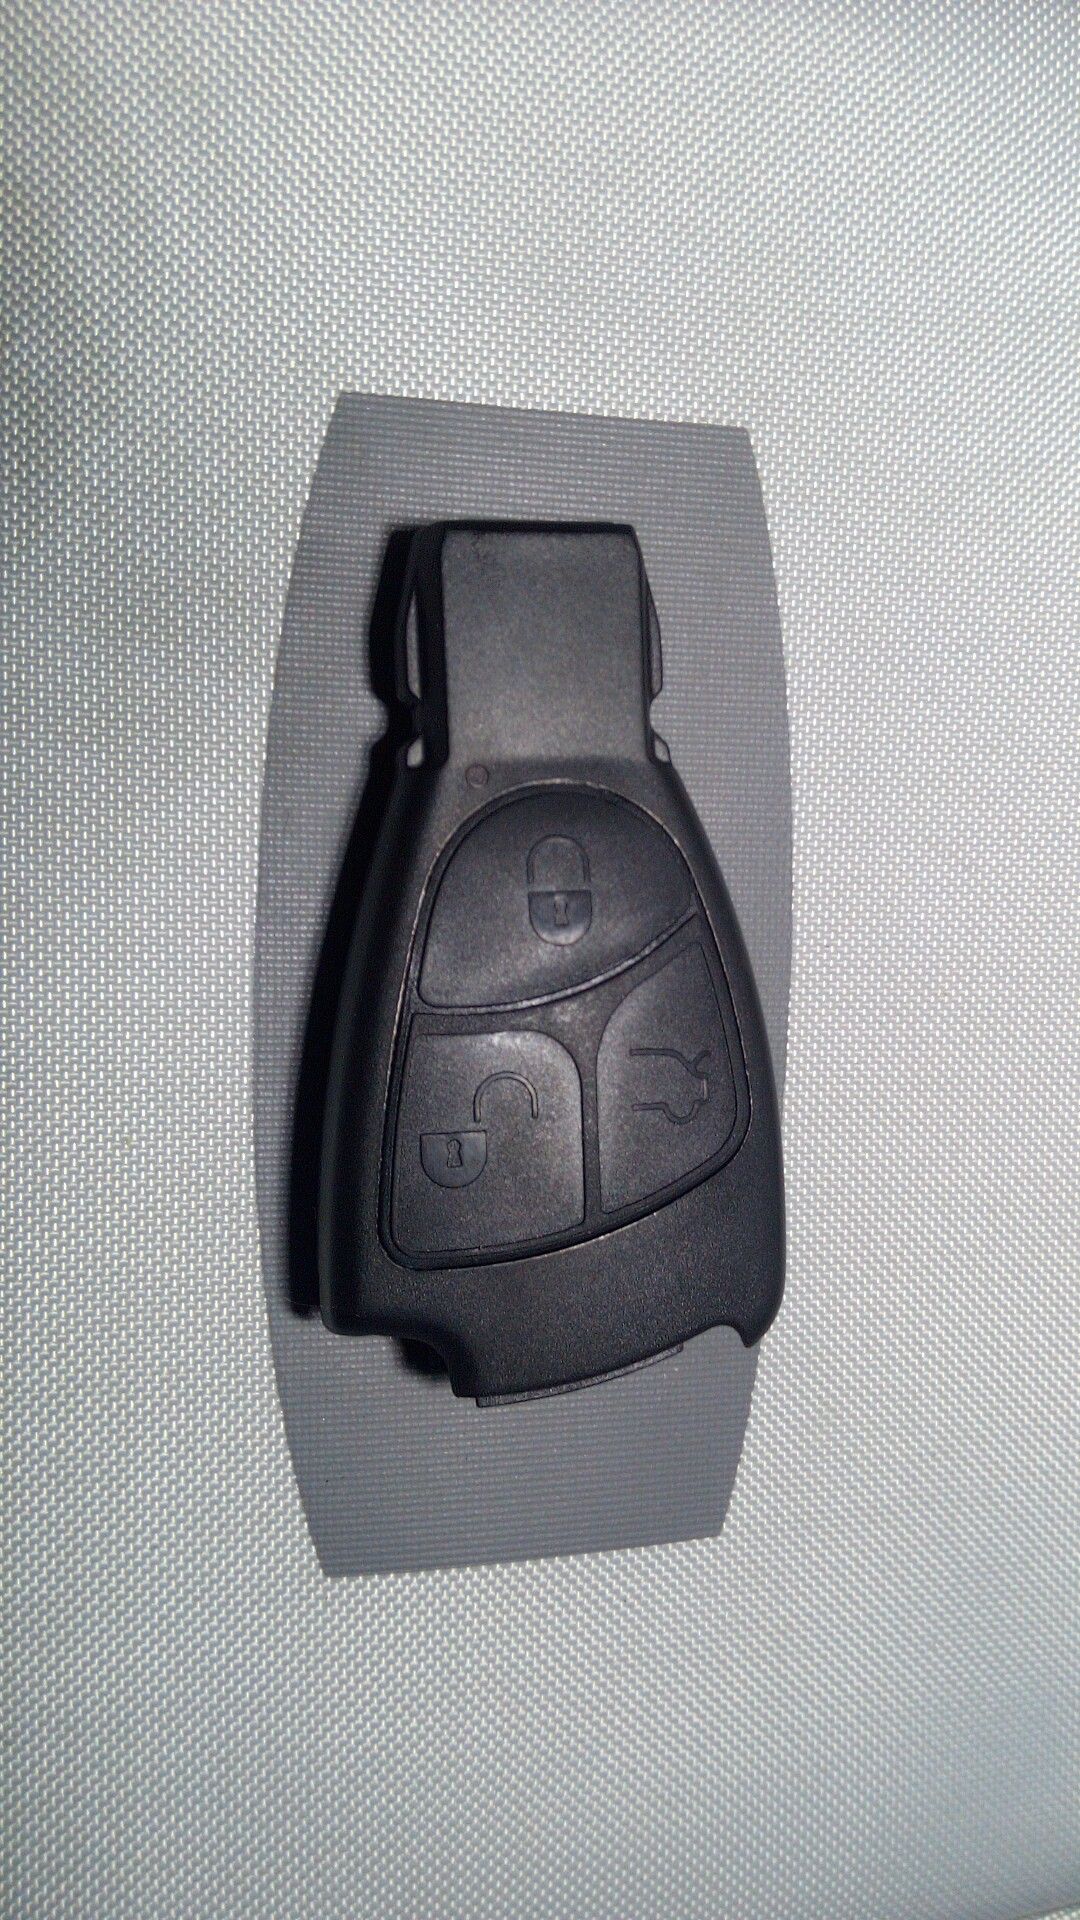 Mercedes key fob case replacement